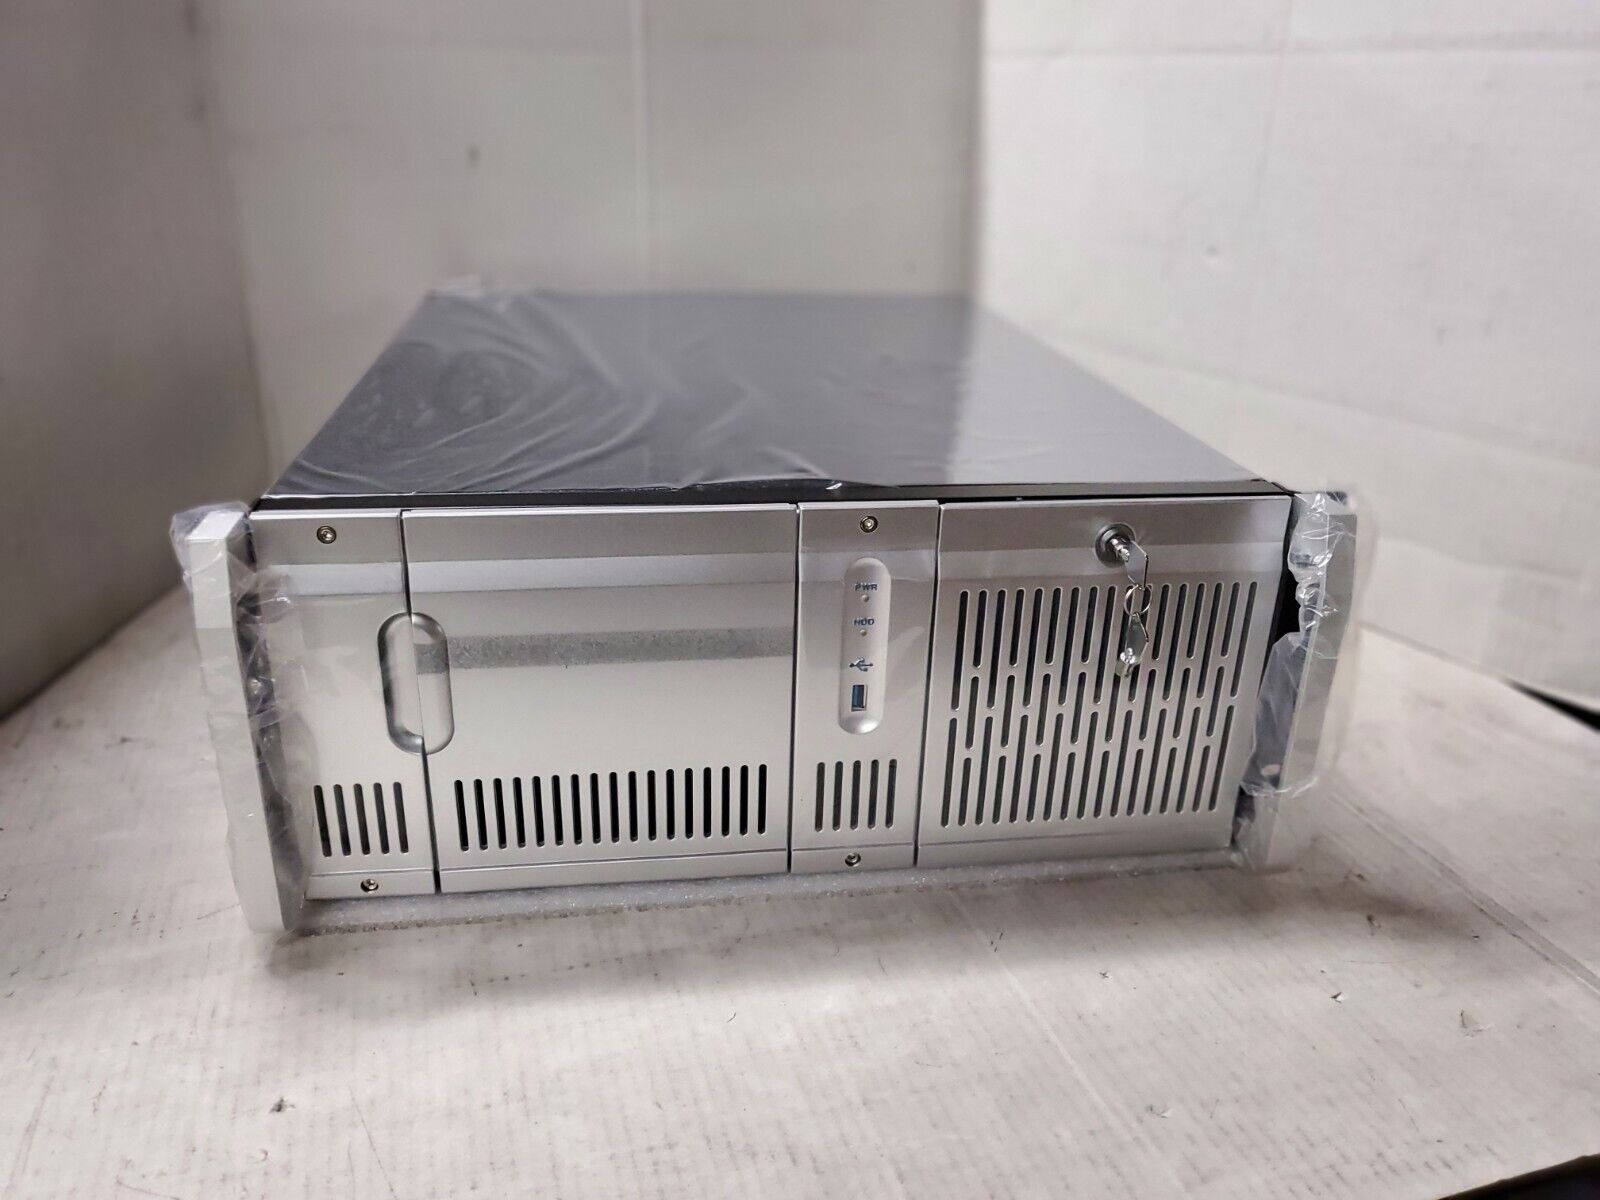 4U rackmount server case/chassis with 4 x SATA hot swap